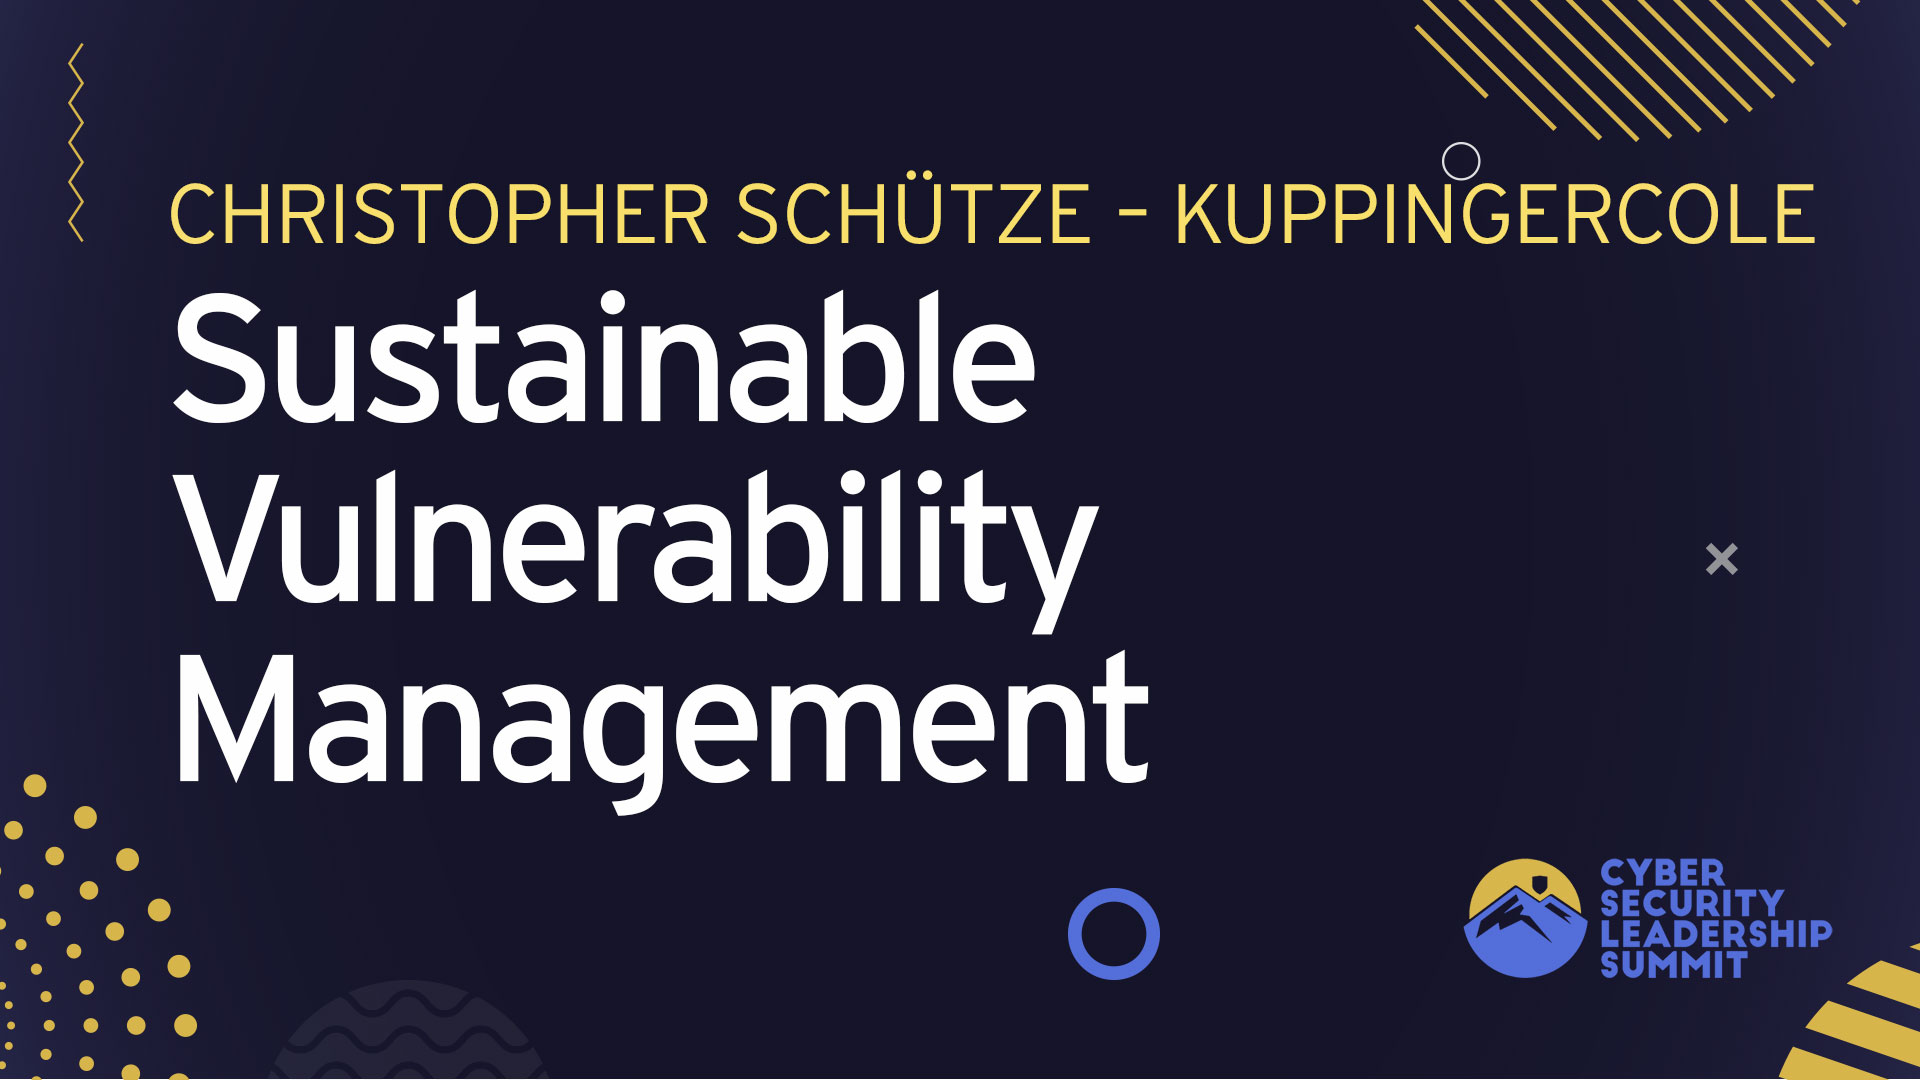 Sustainable Vulnerability Management: Case Study by KuppingerCole